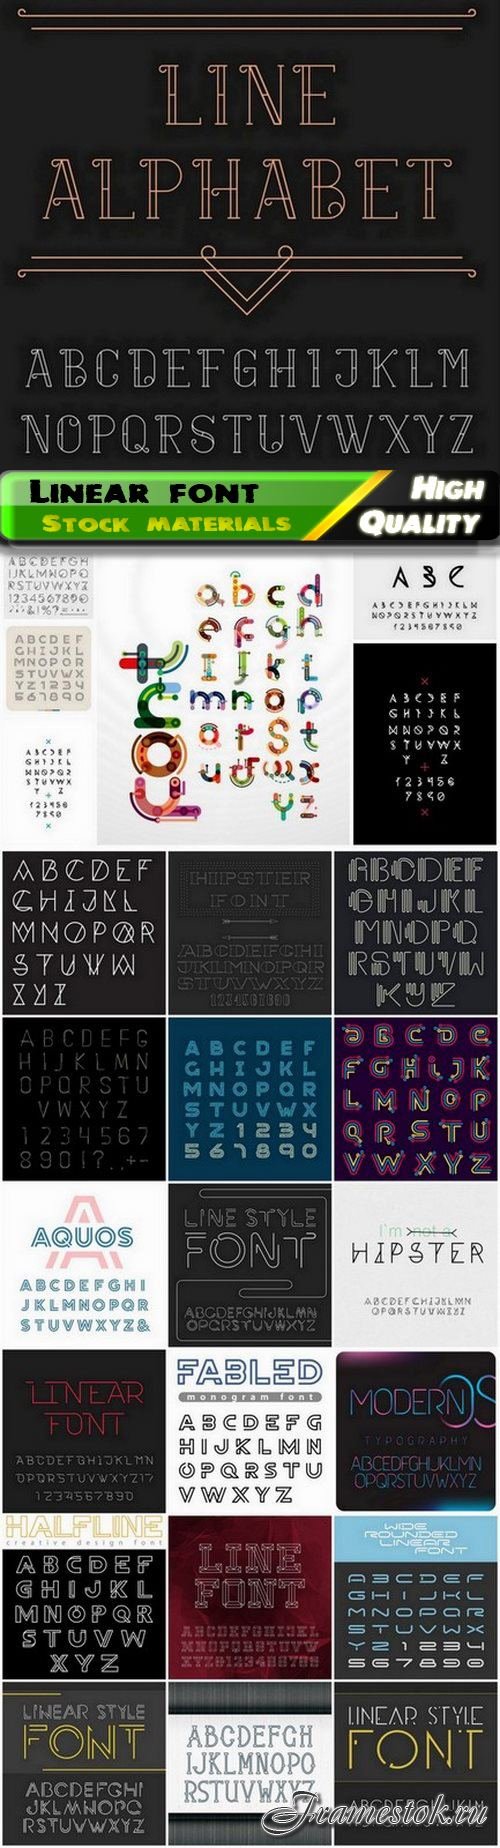 Linear font and alphabet letter and number - 25 Eps